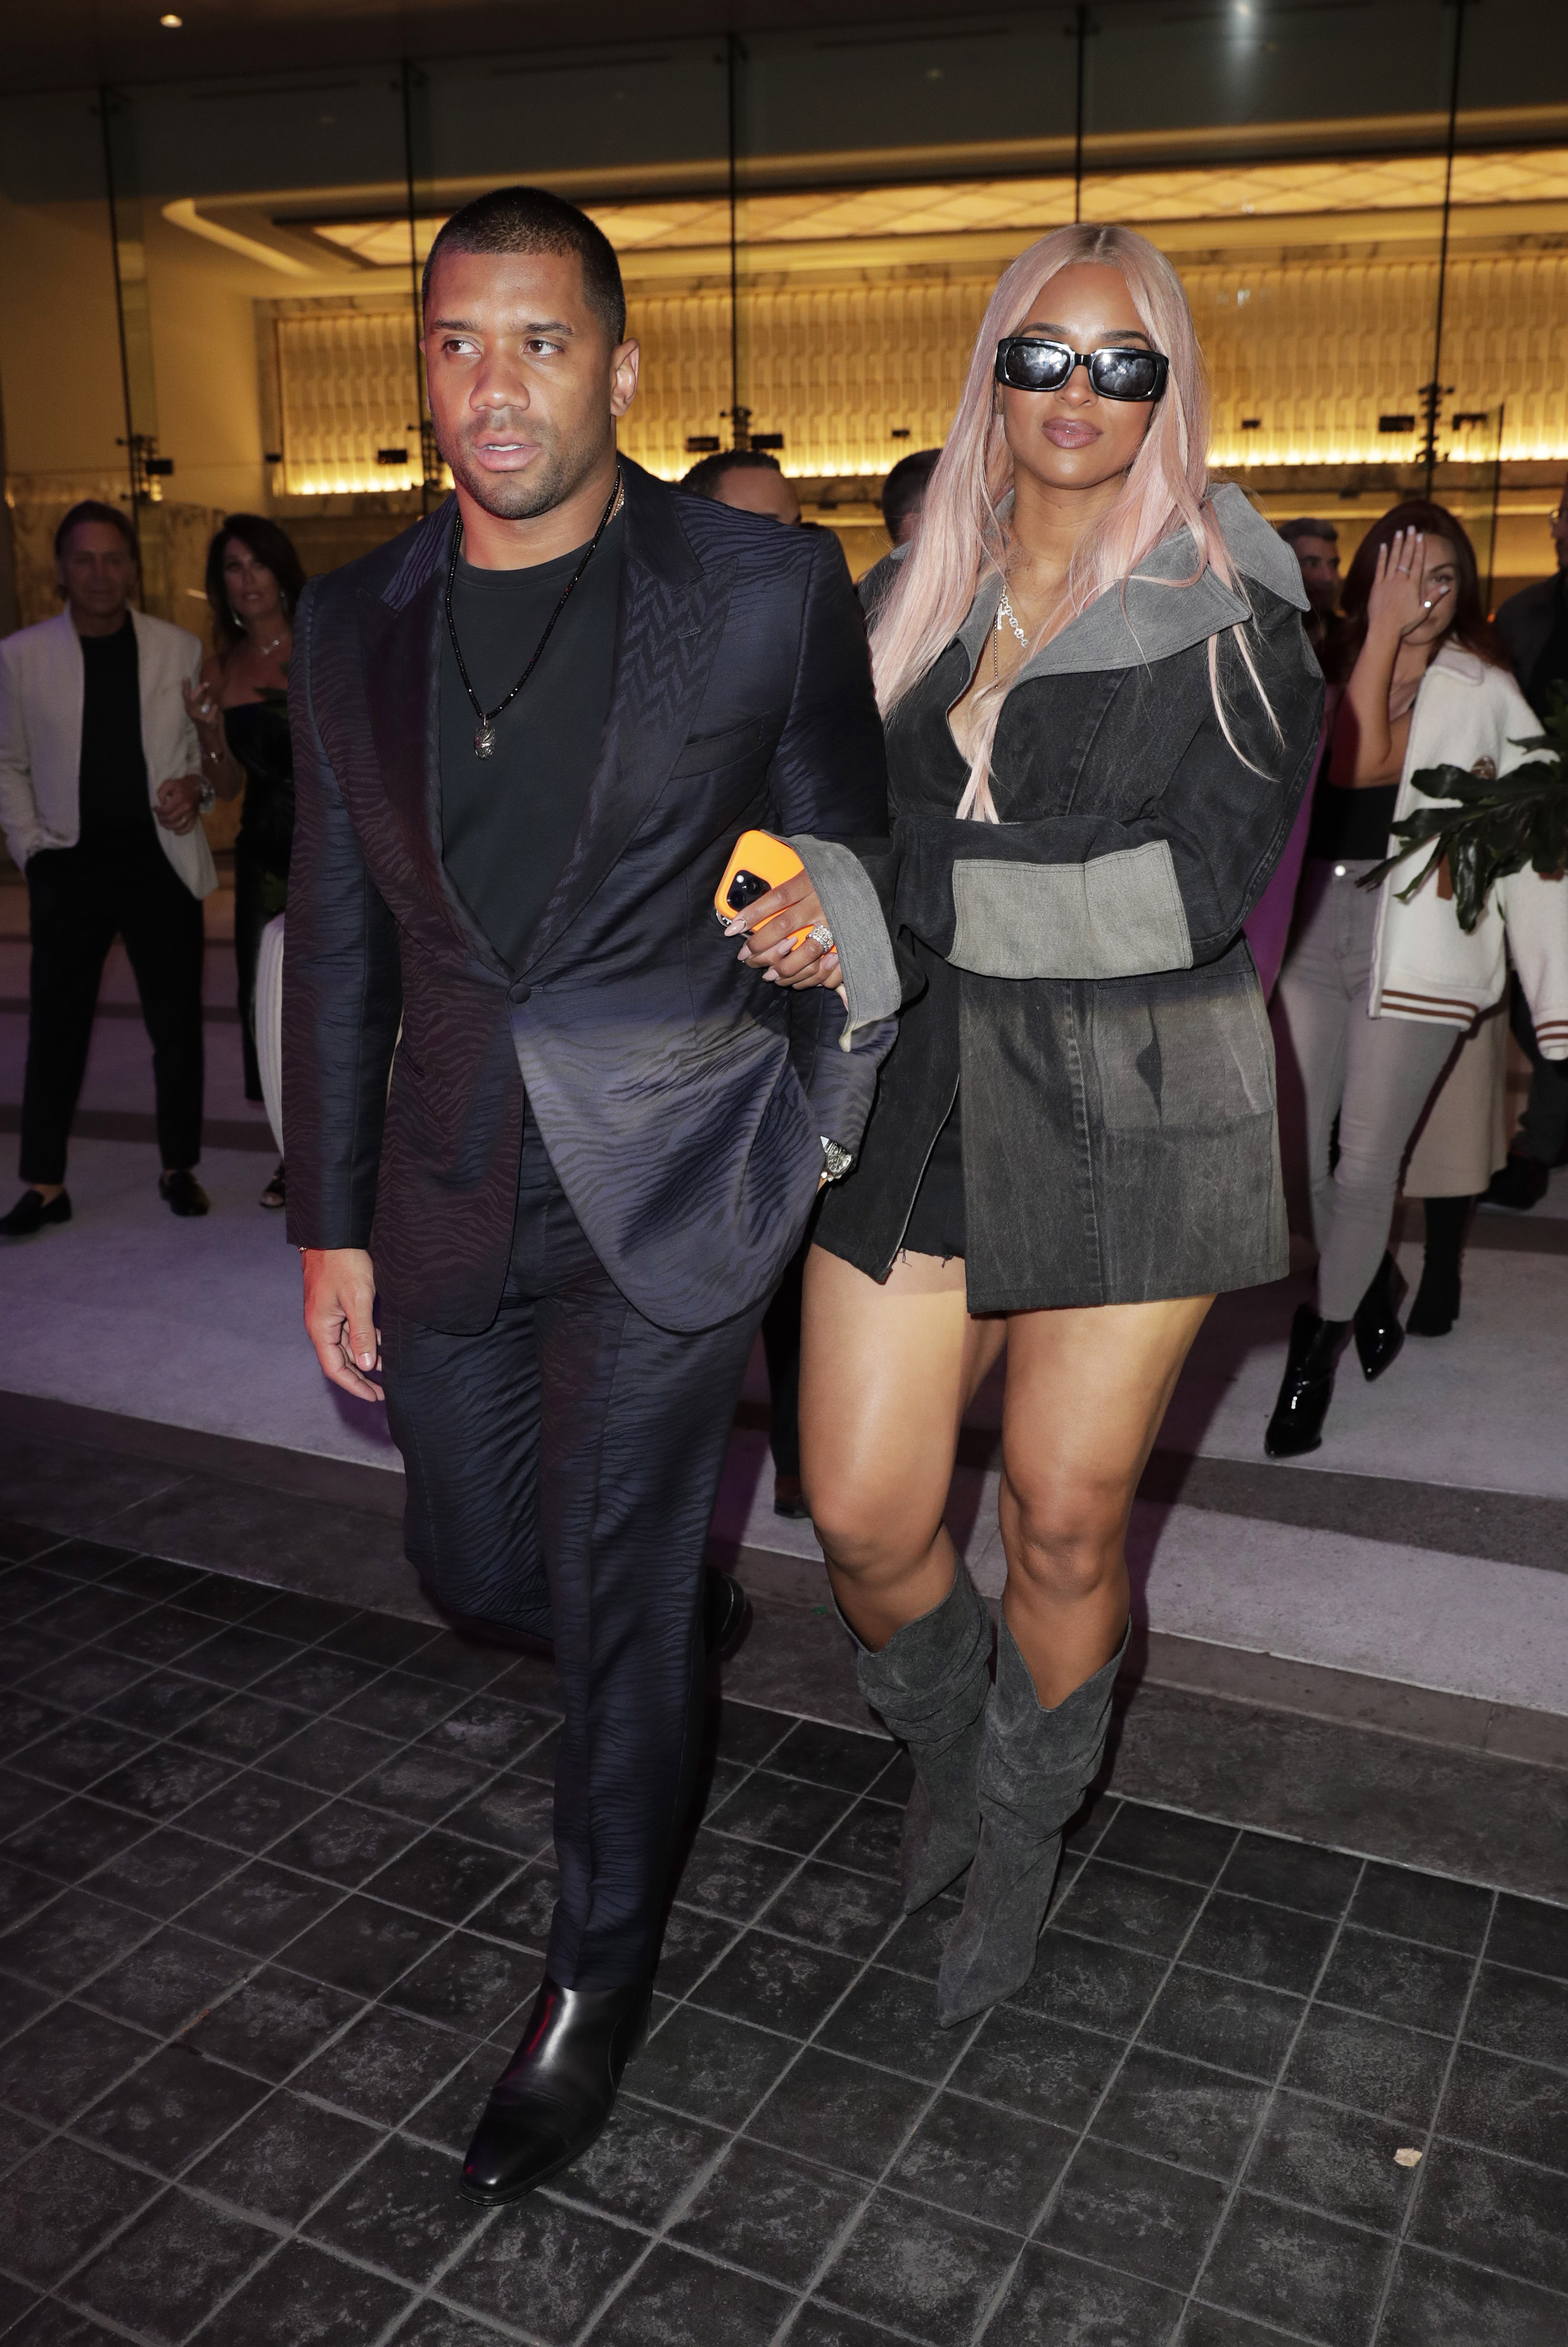 Ciara and her husband Russell Wilson linked arms as they braved the light rain on Friday night and headed to the valet